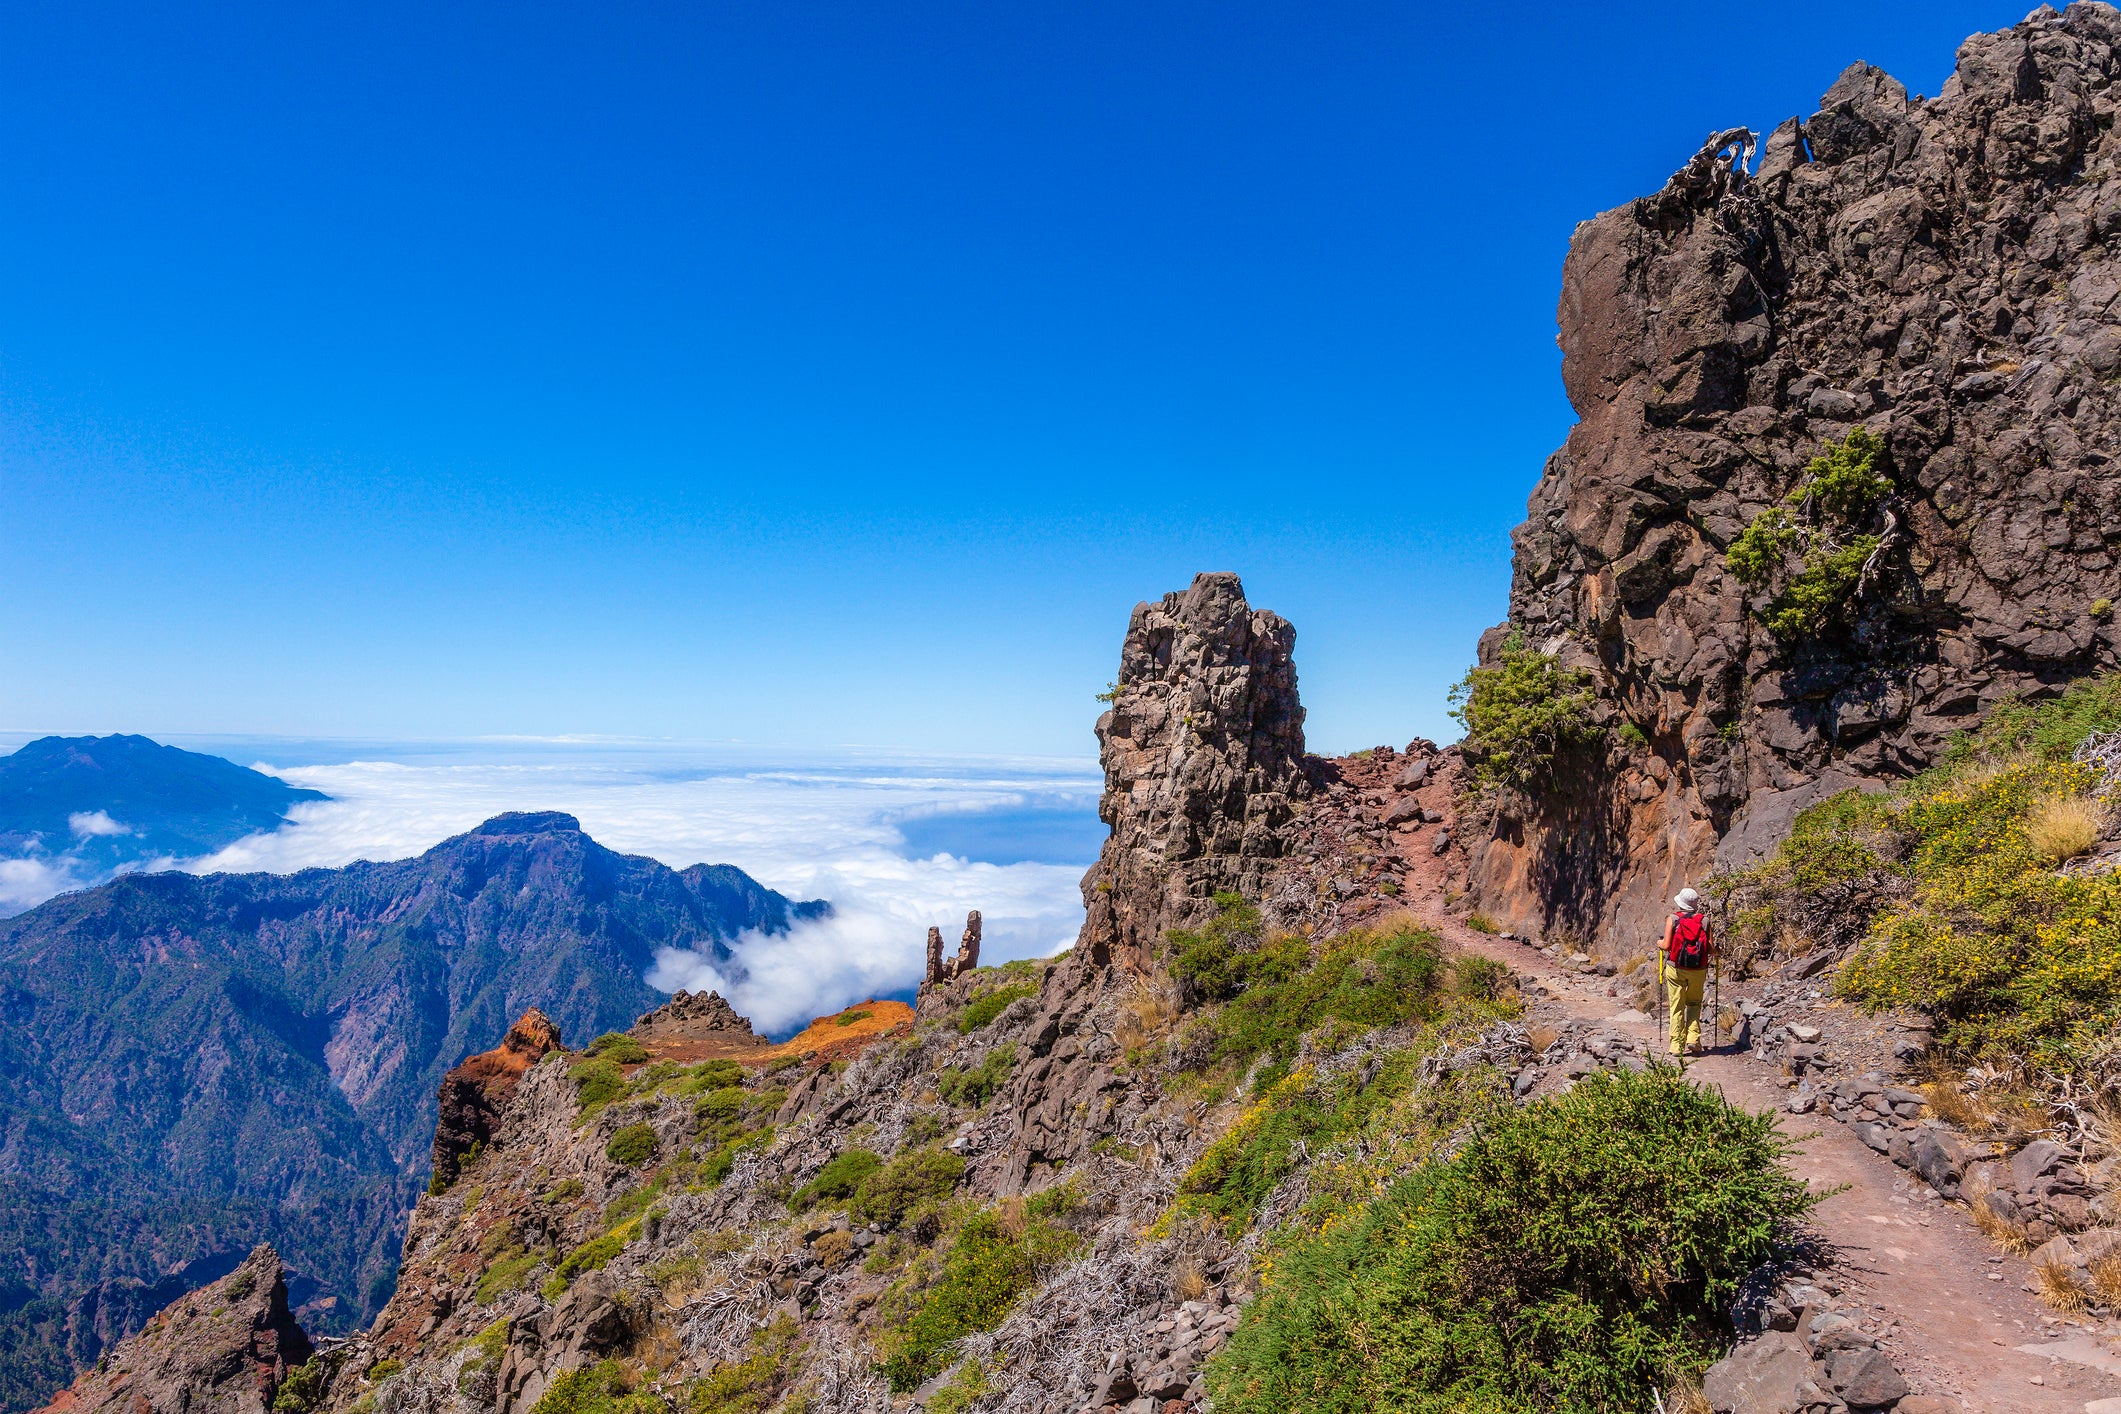 La Palma, the fifth-largest of the Canary Islands, is a popular destination for cruise-goers